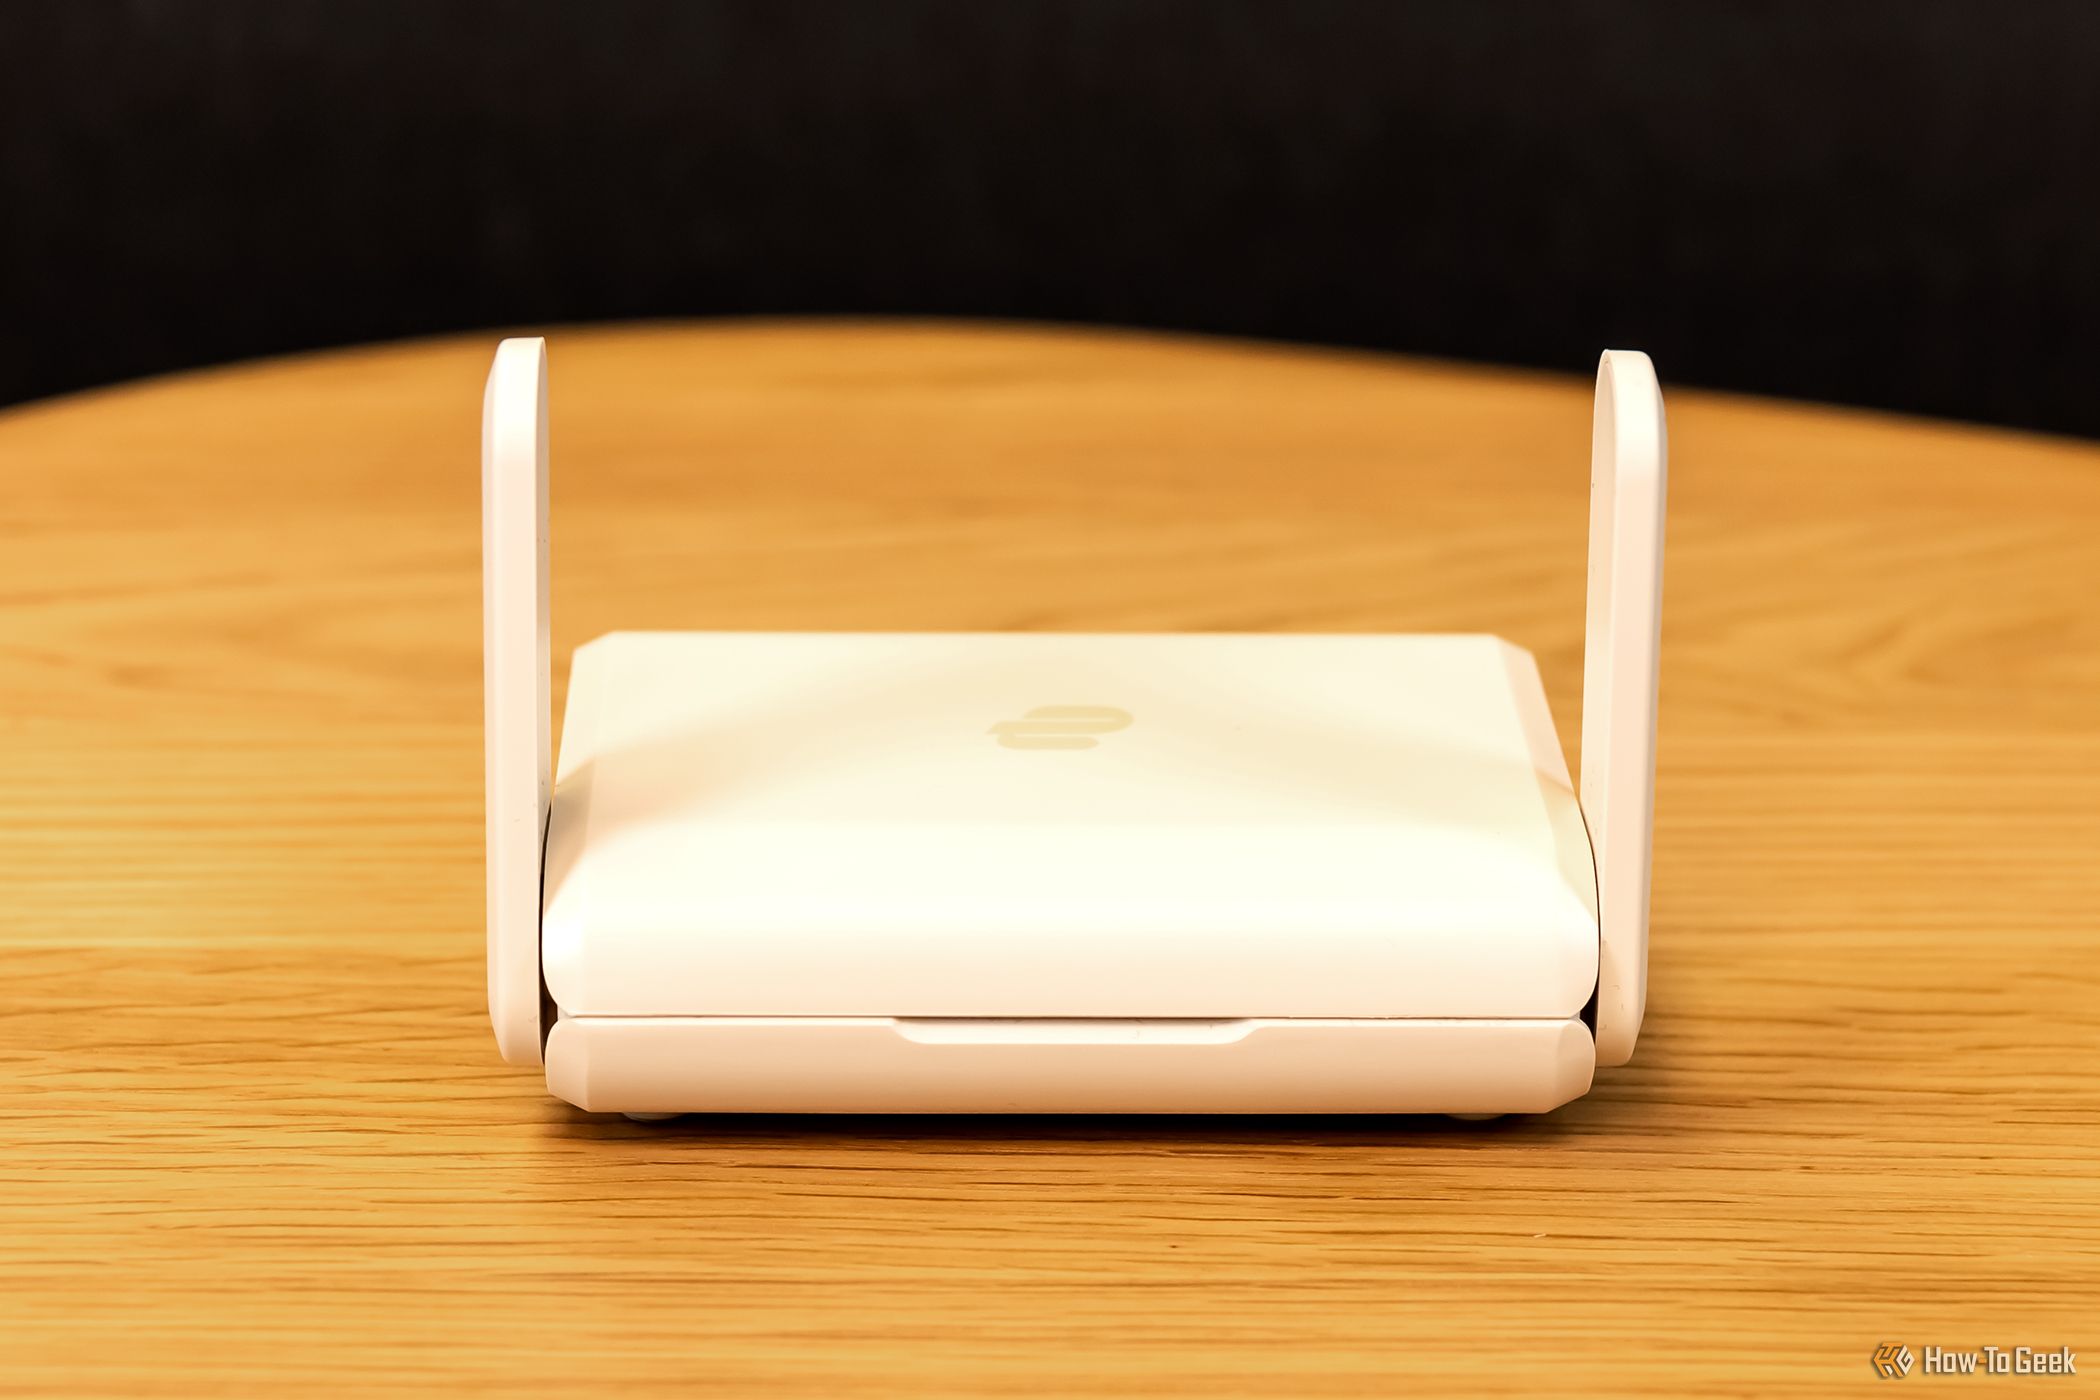 The ExpressVPN Aircove Go with the antennas extended